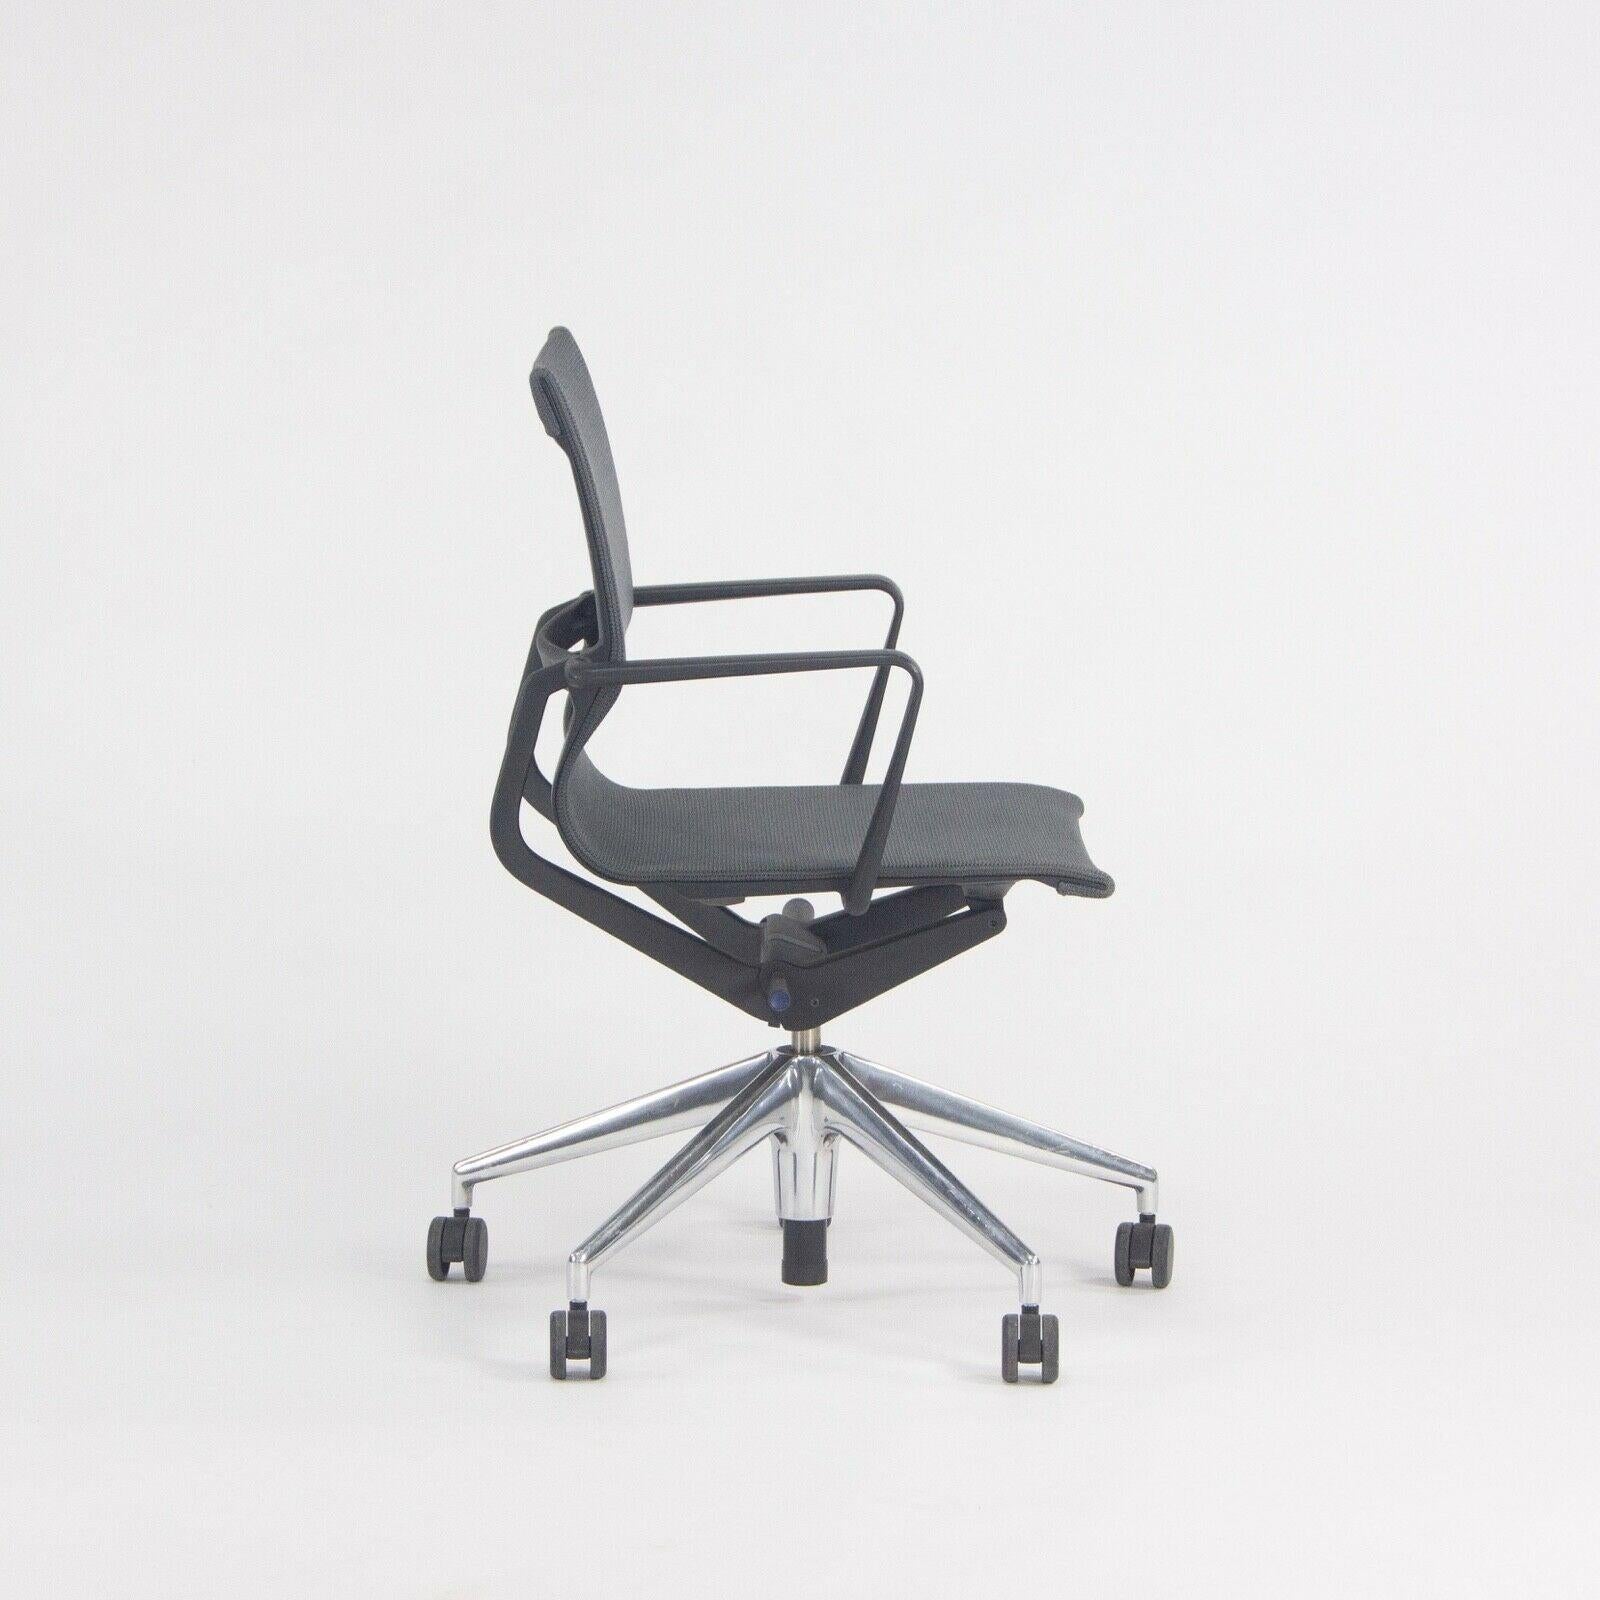 Swiss 2018 Vitra Physix Rolling Desk Chair by Alberta Meda Gray Mesh Sets Available For Sale